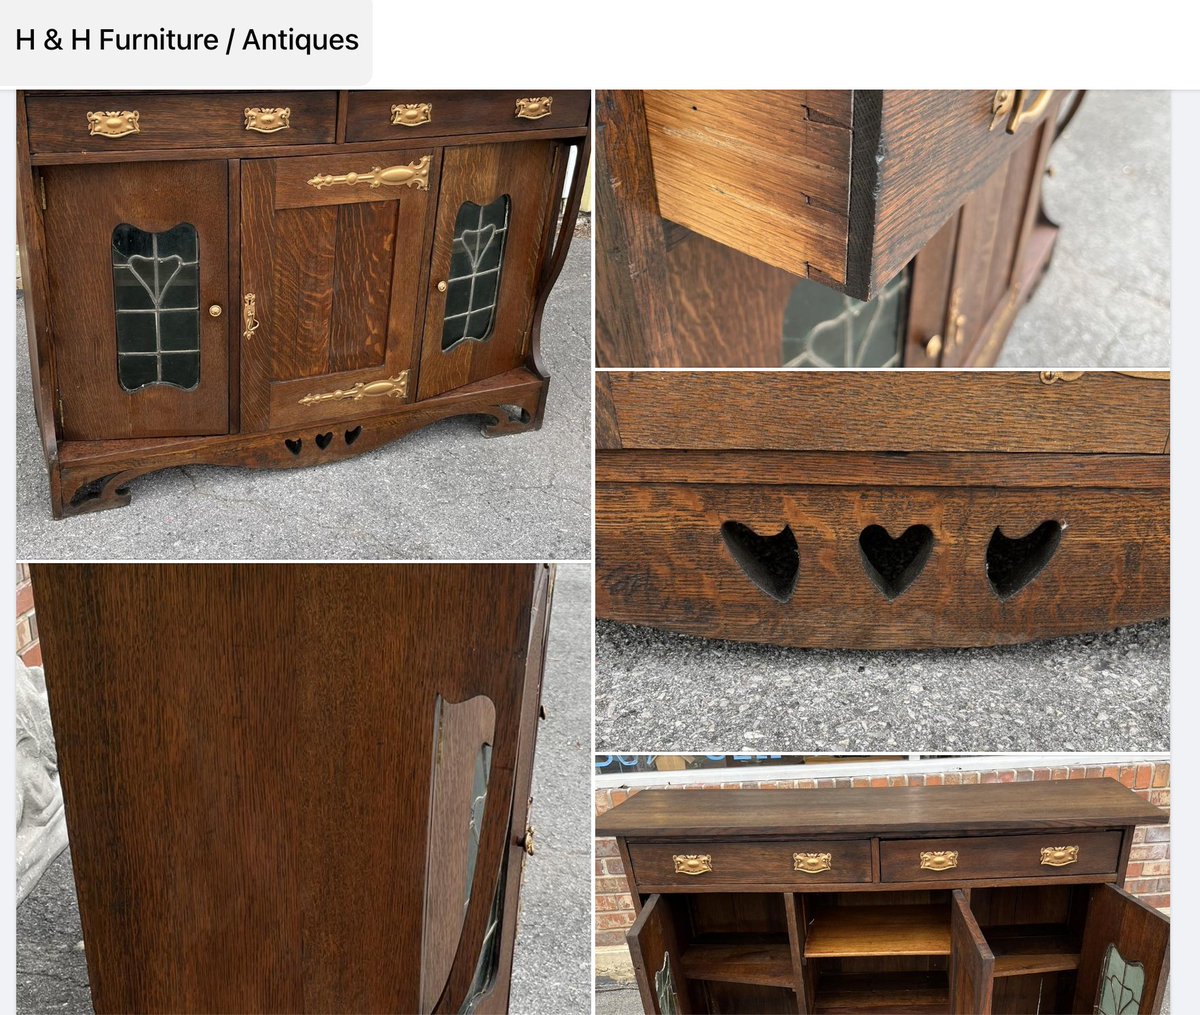 Take a look at this English Arts & Crafts buffet now in the store. Quartersawn oak, hand cut dovetails, cutouts and leaded glass with heart motif. Unique piece.  #antiquefurniture #englishfurniture #artsandcraftsmovement